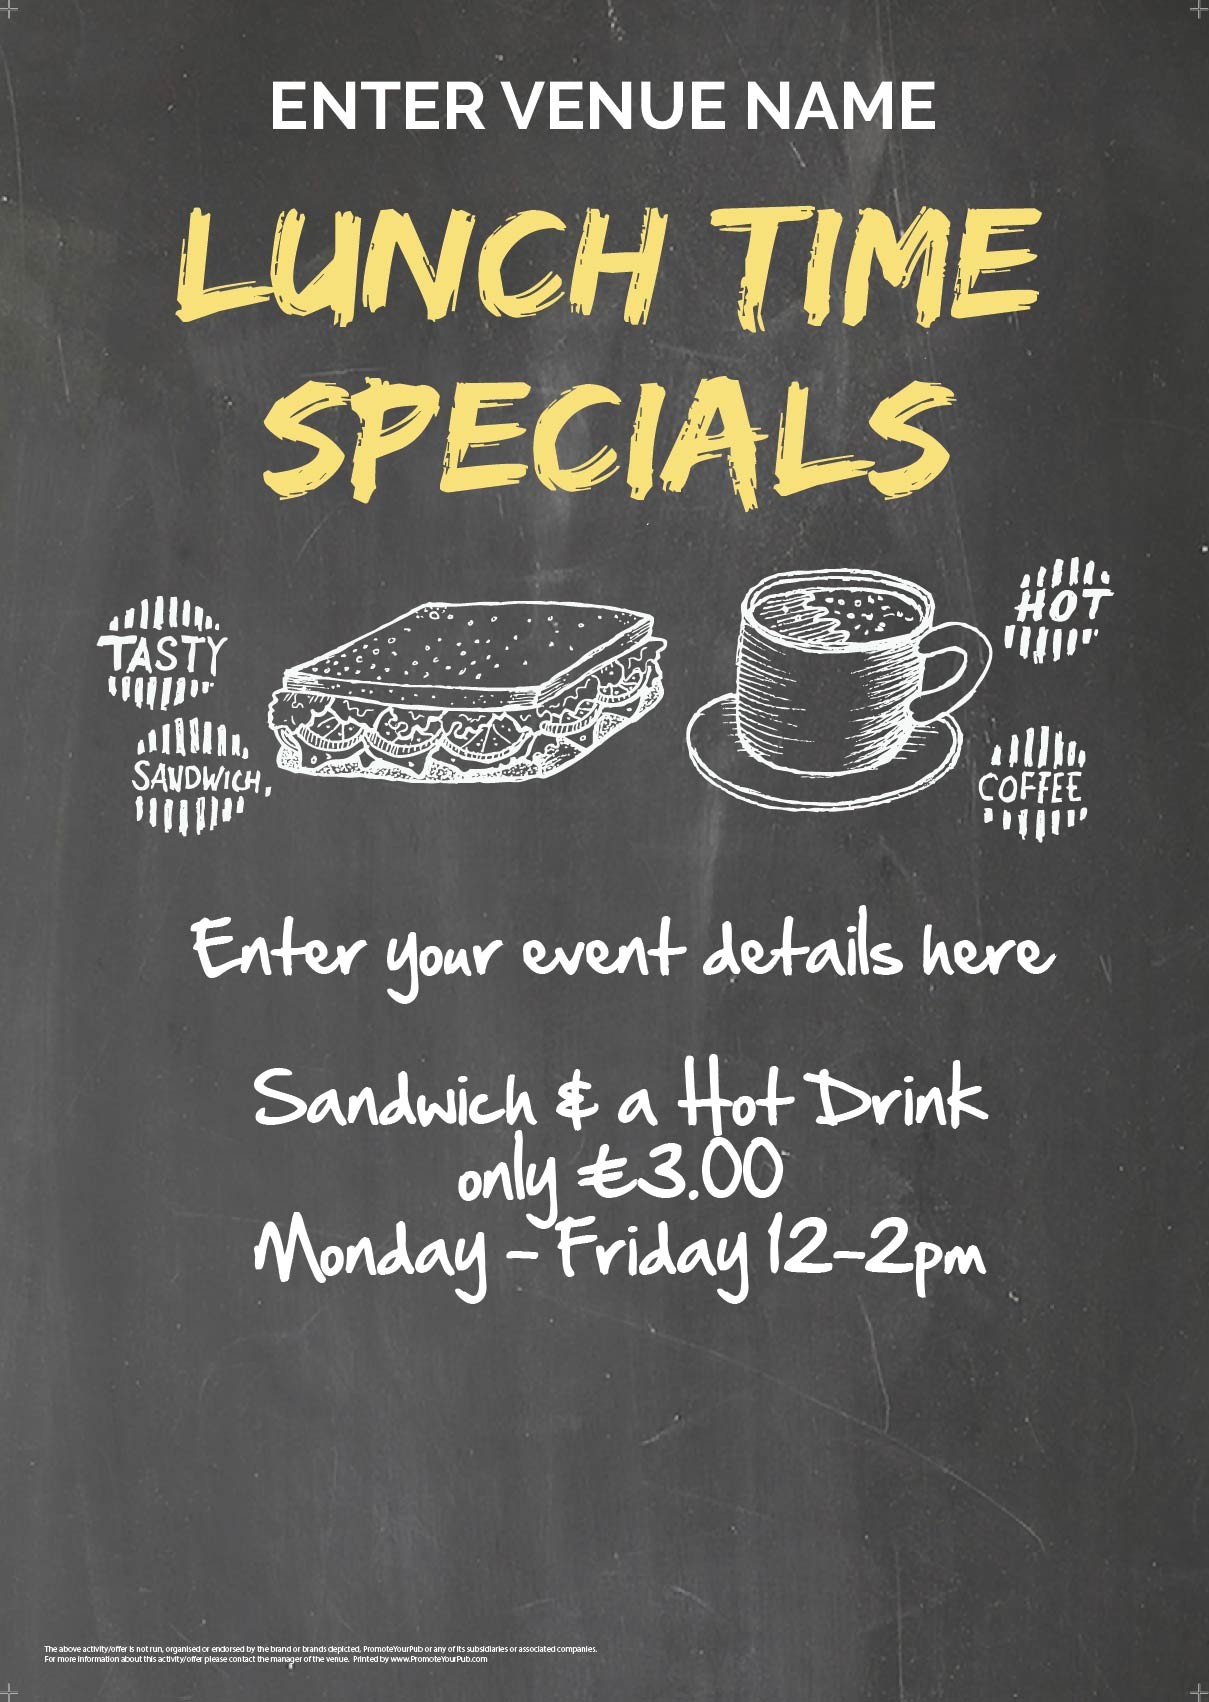 Lunchtime Specials Poster (chalkboard theme)